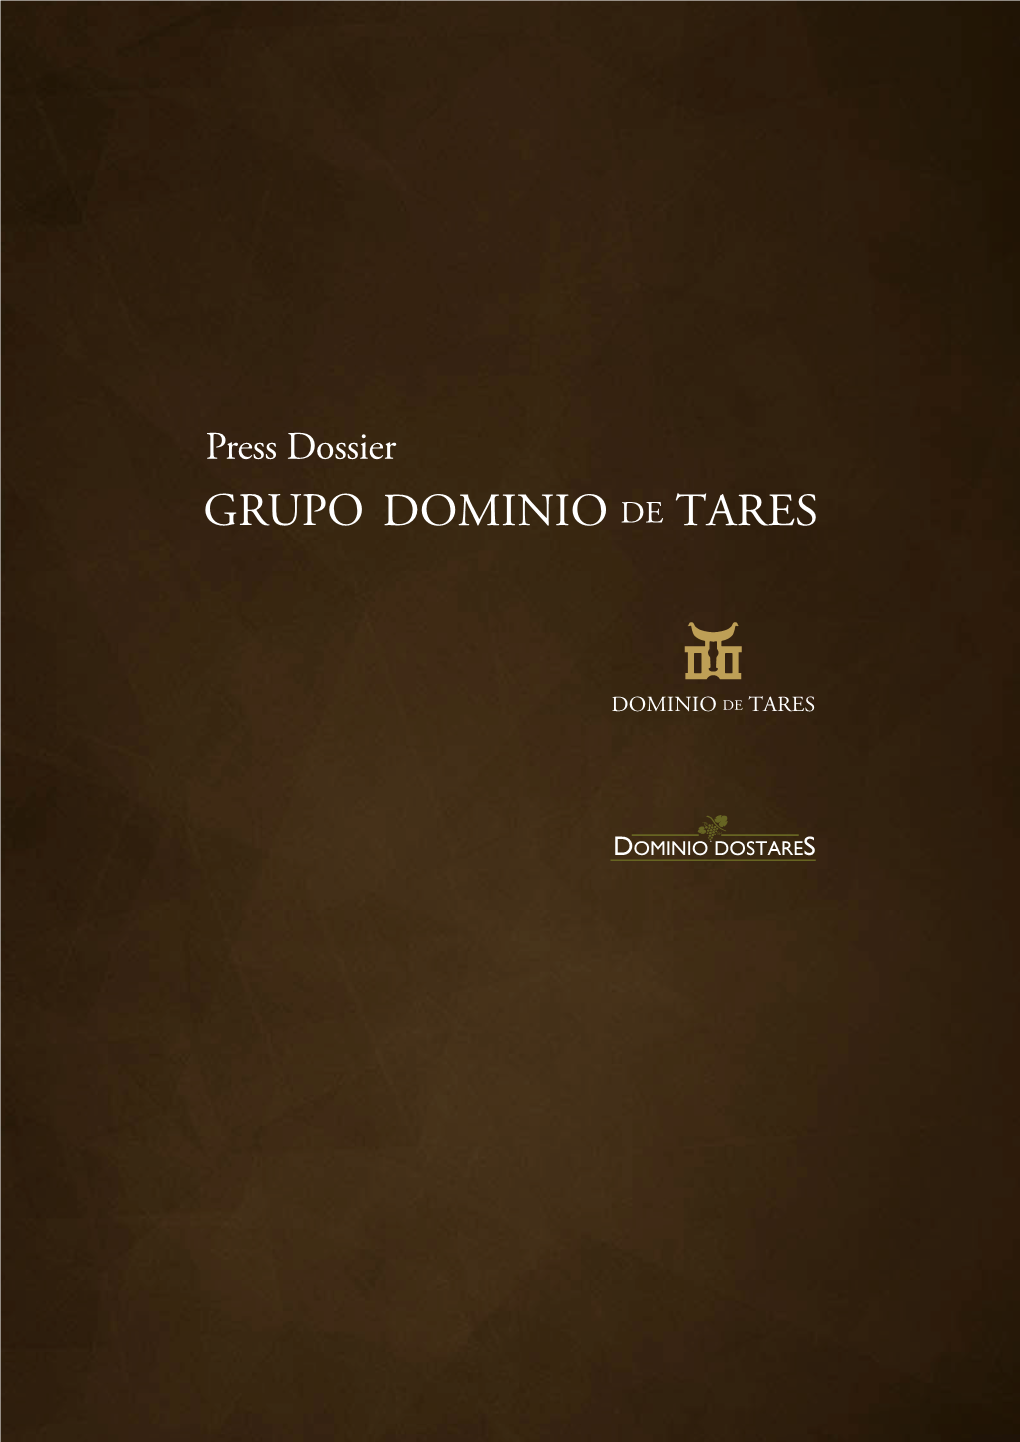 Press Dossier Grupo Dominio De Tares Has Always Wanted to Offer the World the Native Varieties of Northeastern Spain